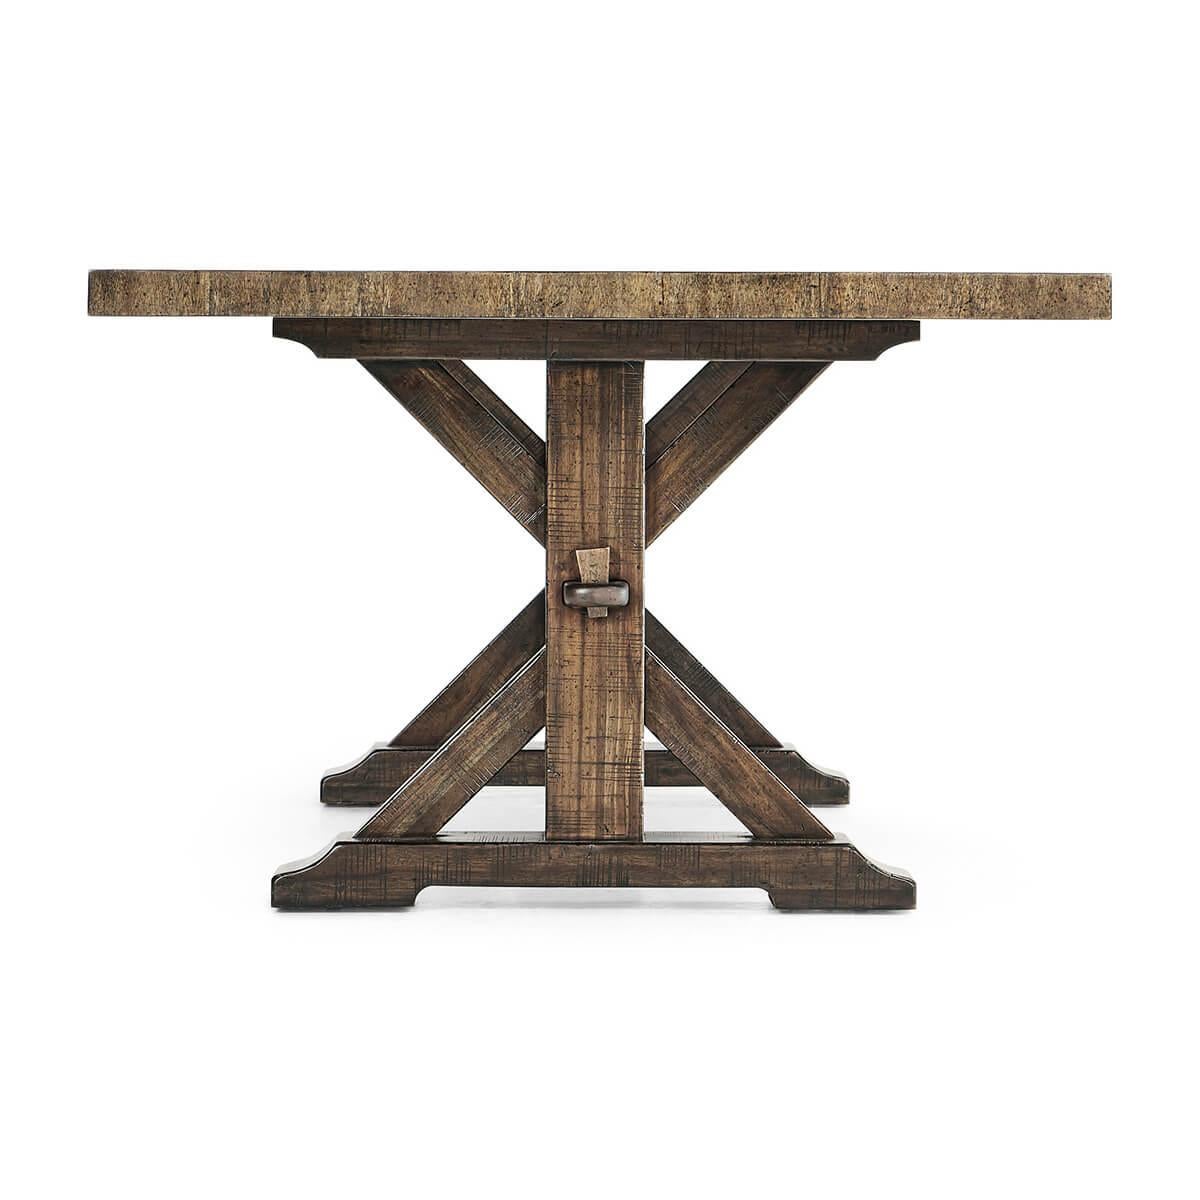 Vietnamese Rustic Country Dining Table, Medium Drift For Sale